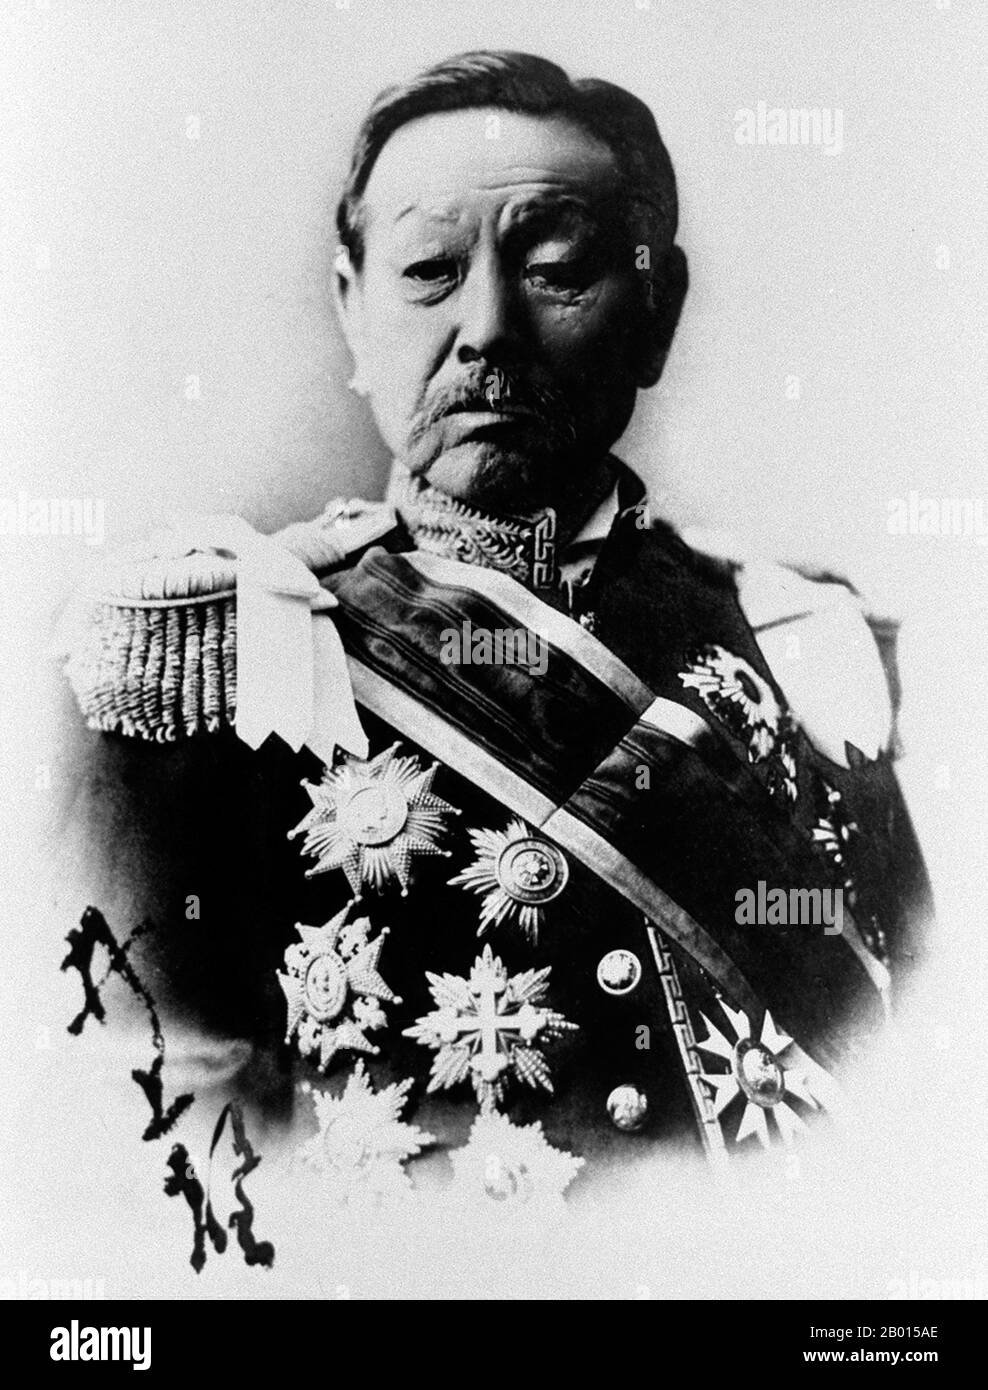 Japan: Count Inoue Kaoru (16 January 1836 - 1 September 1915), a Japanese politician and statesman.  The Marquis Inoue Kaoru was a Japanese statesman and a member of the Meiji oligarchy that ruled Japan during the Meiji period (1868-1912). Born Yakichi to a samurai family, he was initially a leader of a local anti-foreigner movement, but would come to recognise Japan's need to learn from the Western powers. He joined the Choshu Five and studied in London. He would become a senior statesman (Genro), holding great influence over the selection of the nation's leaders and formation of policies. Stock Photo